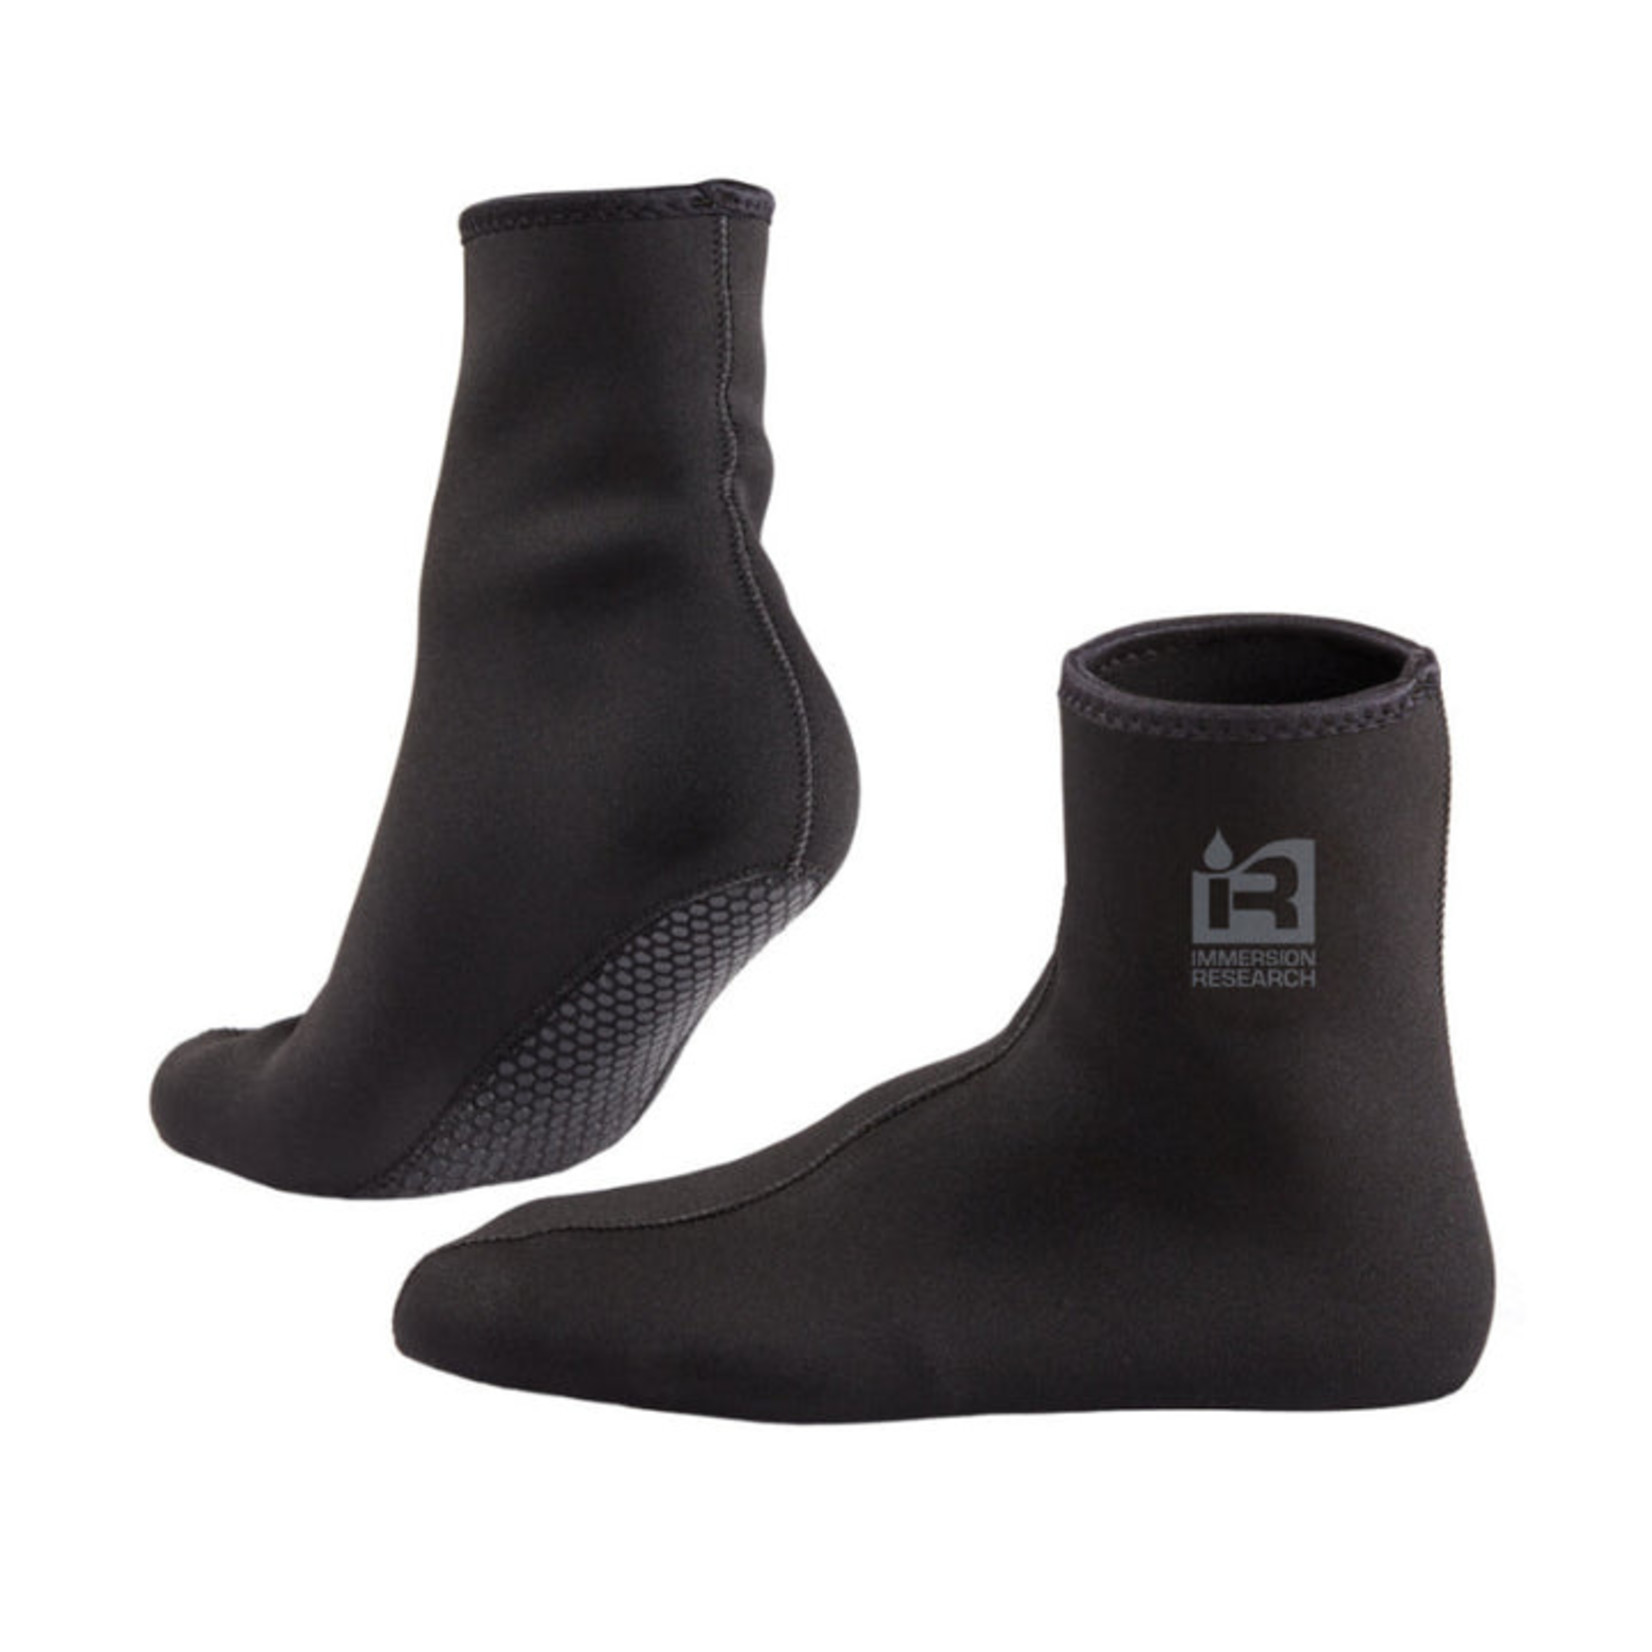 Immersion Research Immersion Research Neoprene Socks